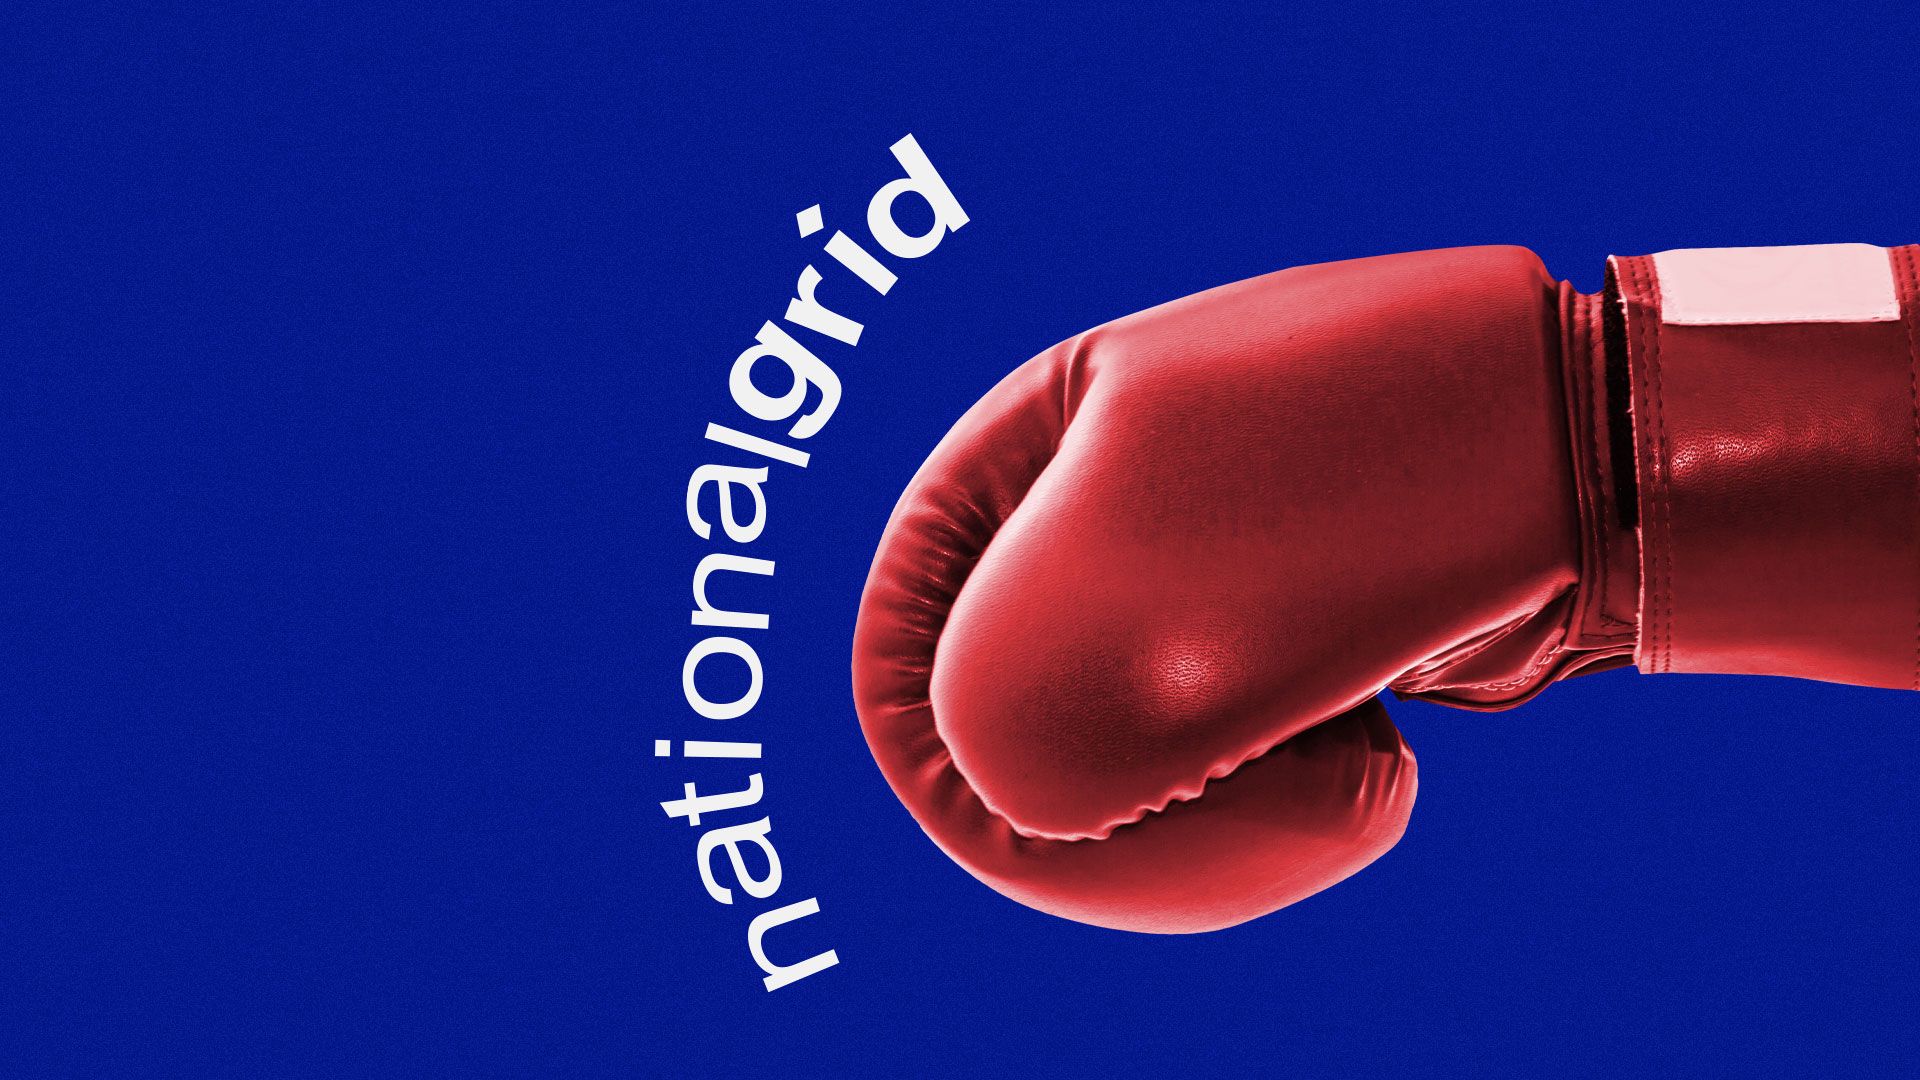 Illustration of boxing glove punching through the National Grid logo.